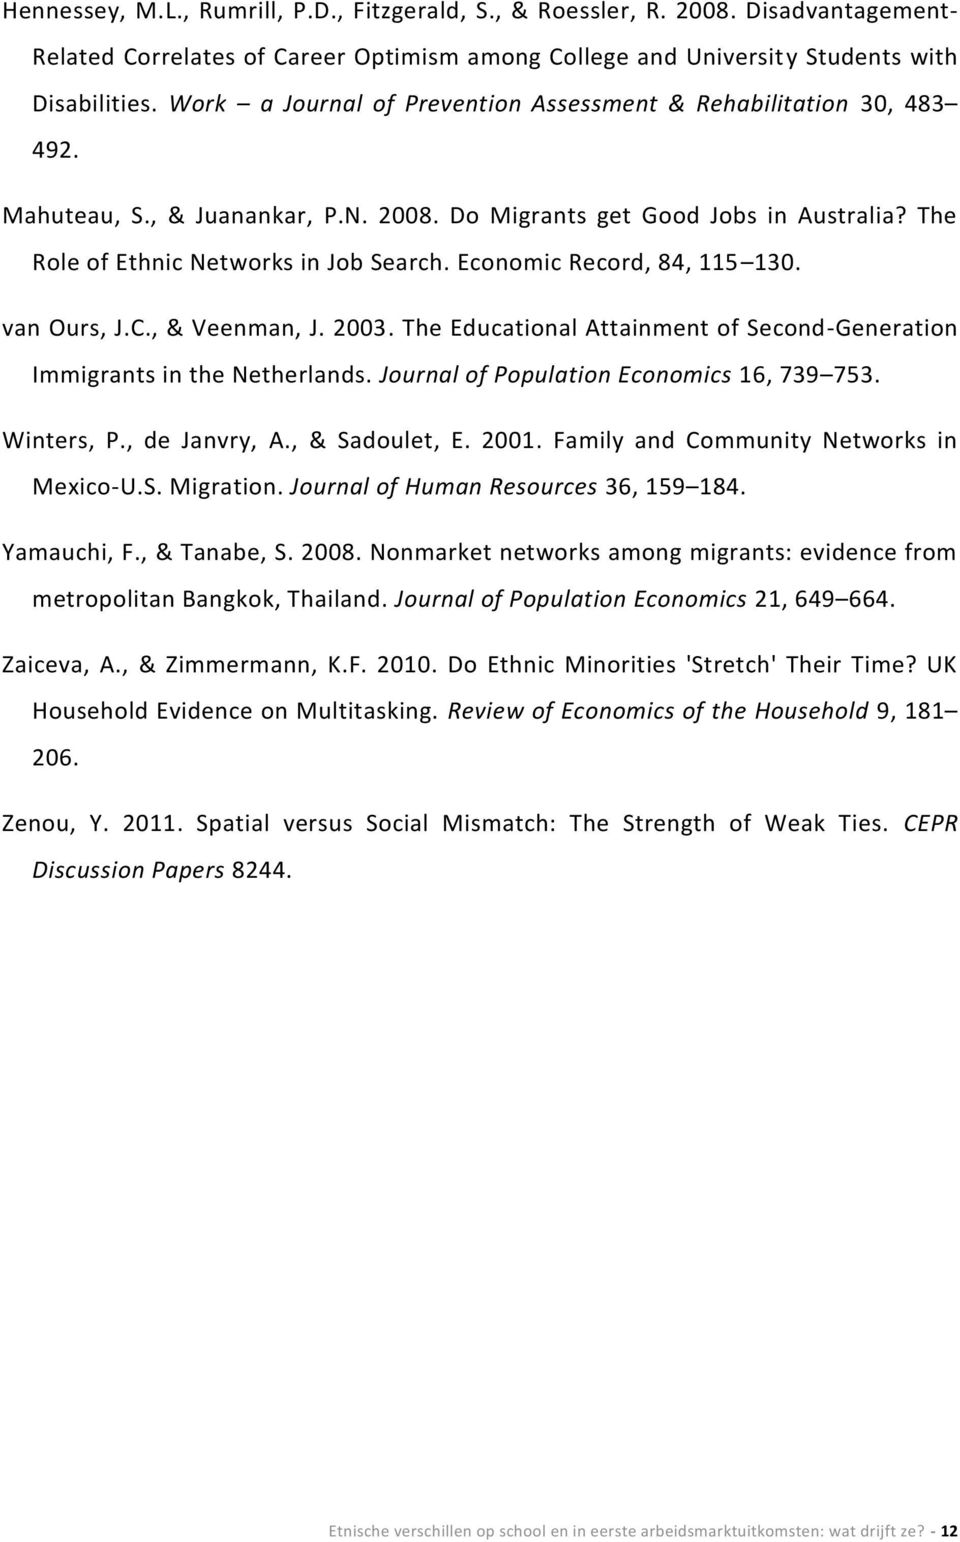 Economic Record, 84, 115 130. van Ours, J.C., & Veenman, J. 2003. The Educational Attainment of Second-Generation Immigrants in the Netherlands. Journal of Population Economics 16, 739 753.